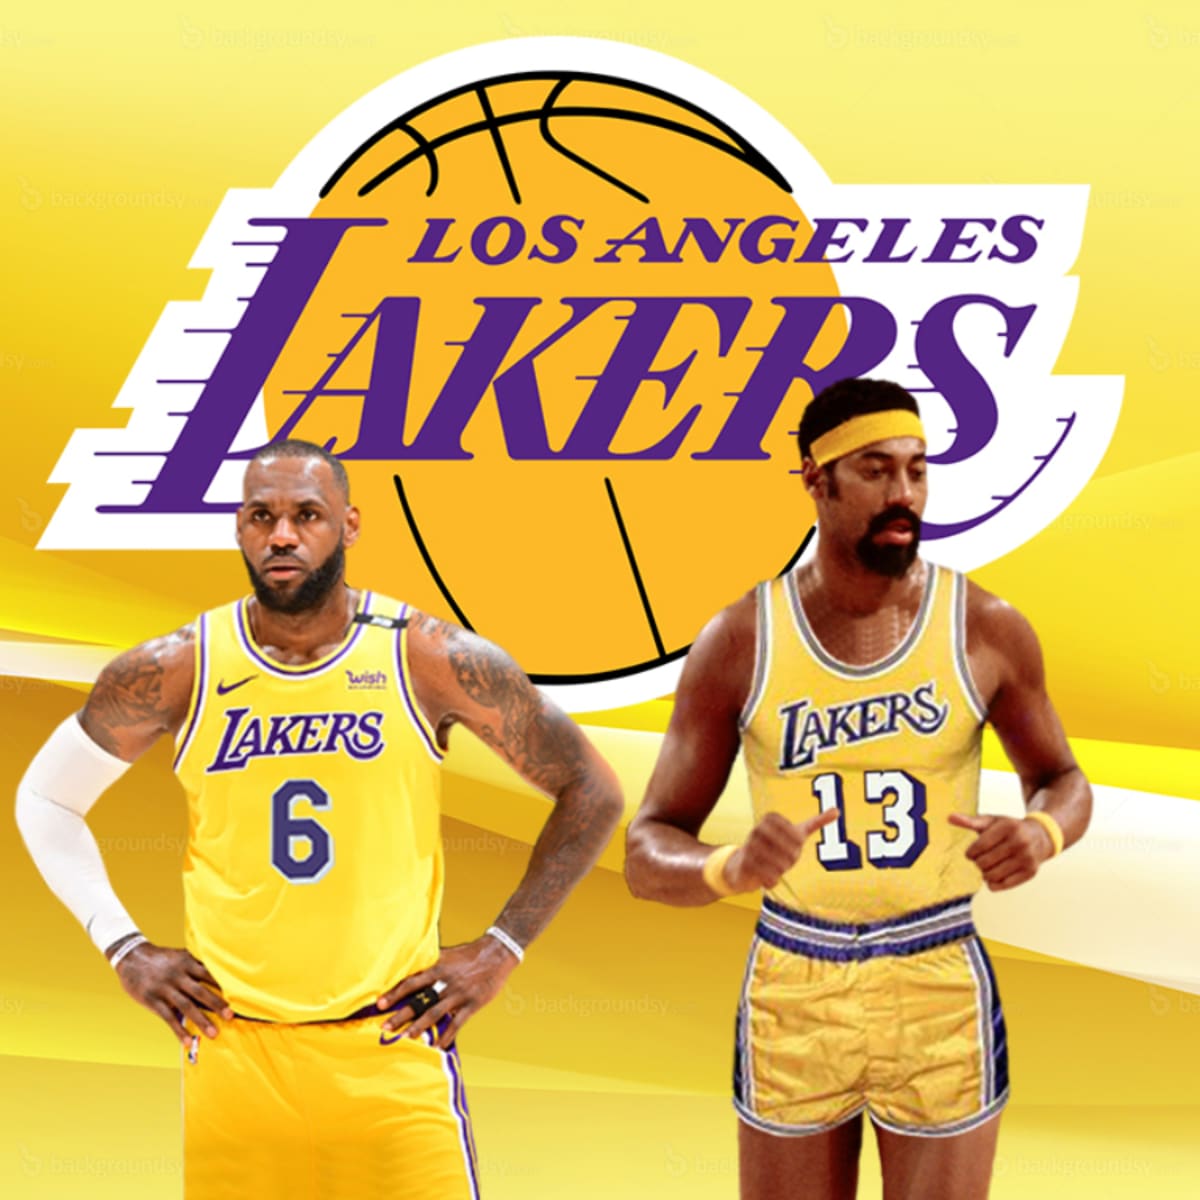 Retire my jersey while you're at it #greenscreen #lebron #lakers #la #